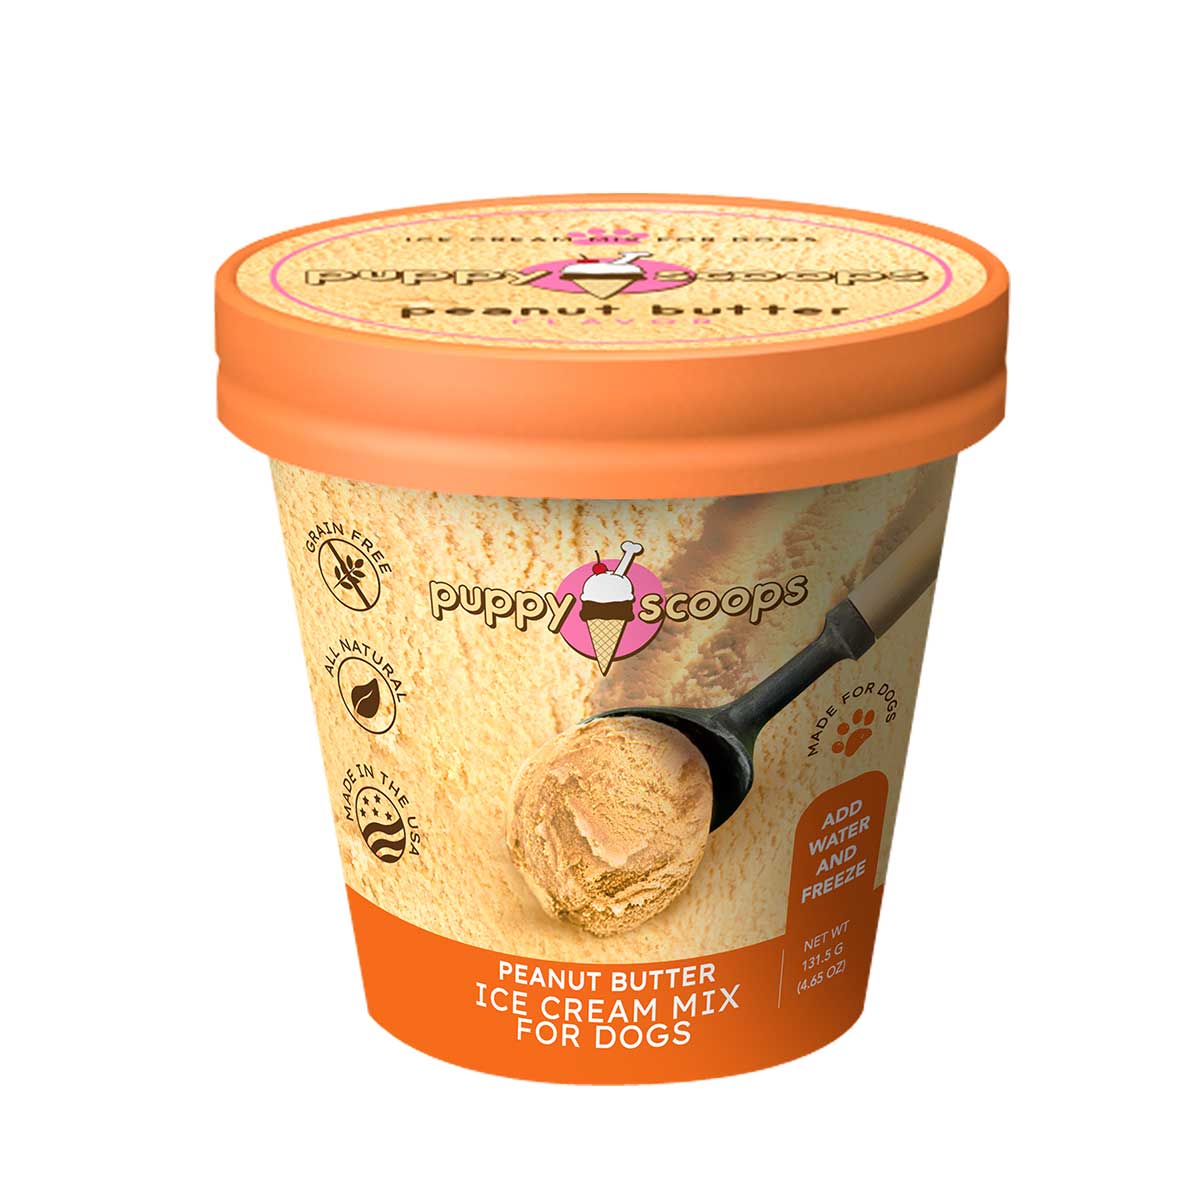 Puppy Scoops Ice Cream Mix - Peanut Butter | Pawlicious & Company